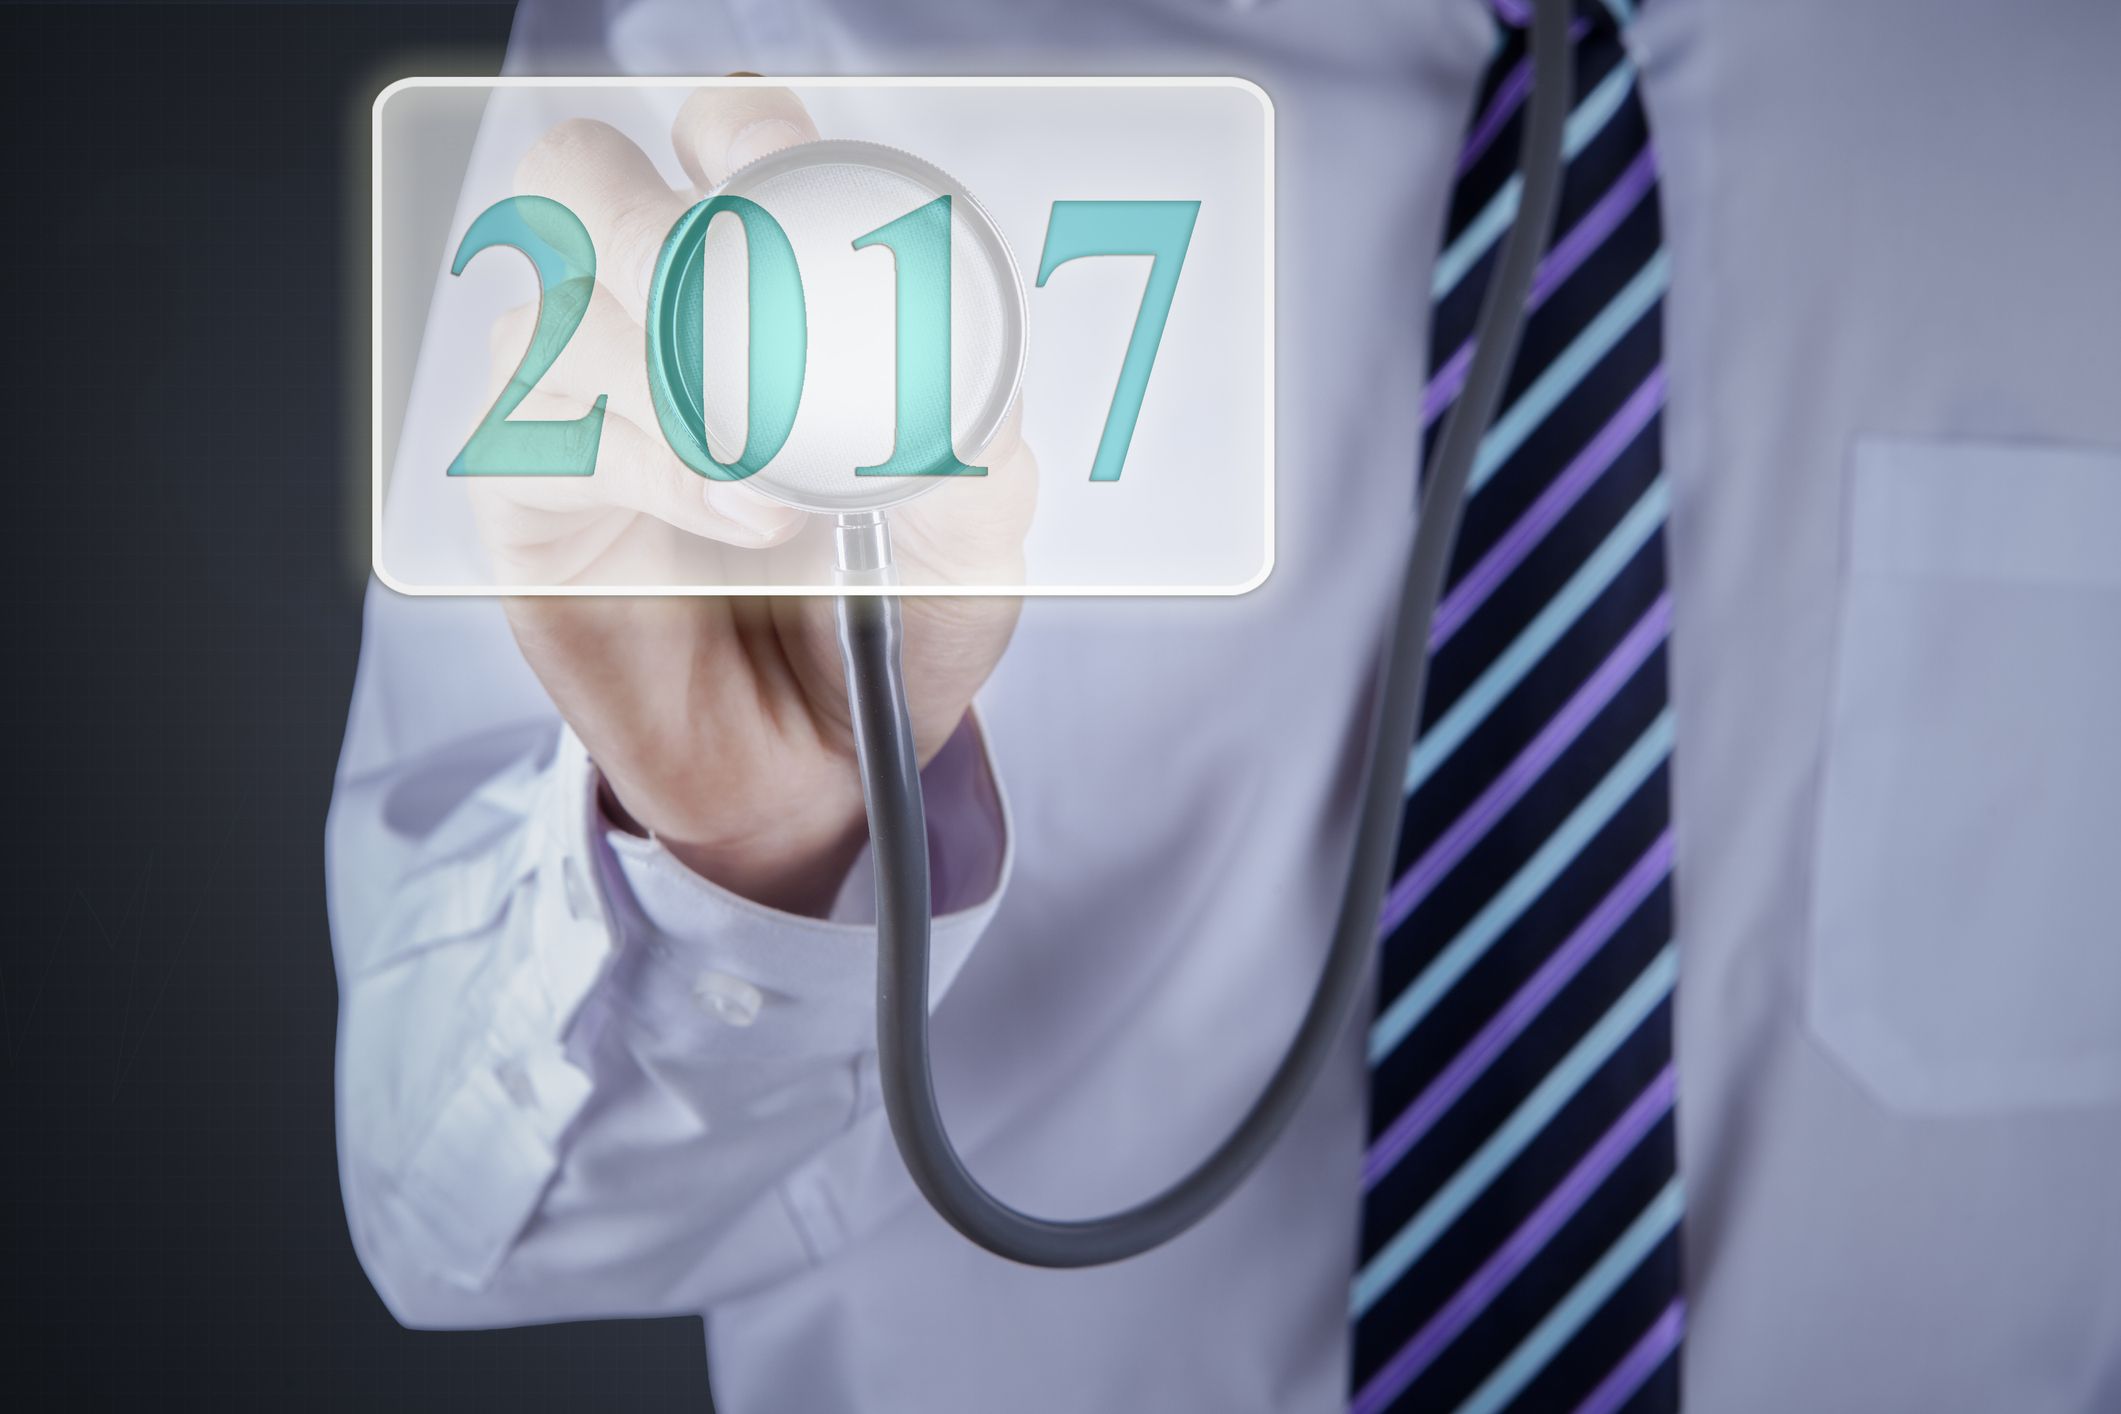 With the New Year approaching, we take a look back at some notable healthcare events that unfolded in 2017.